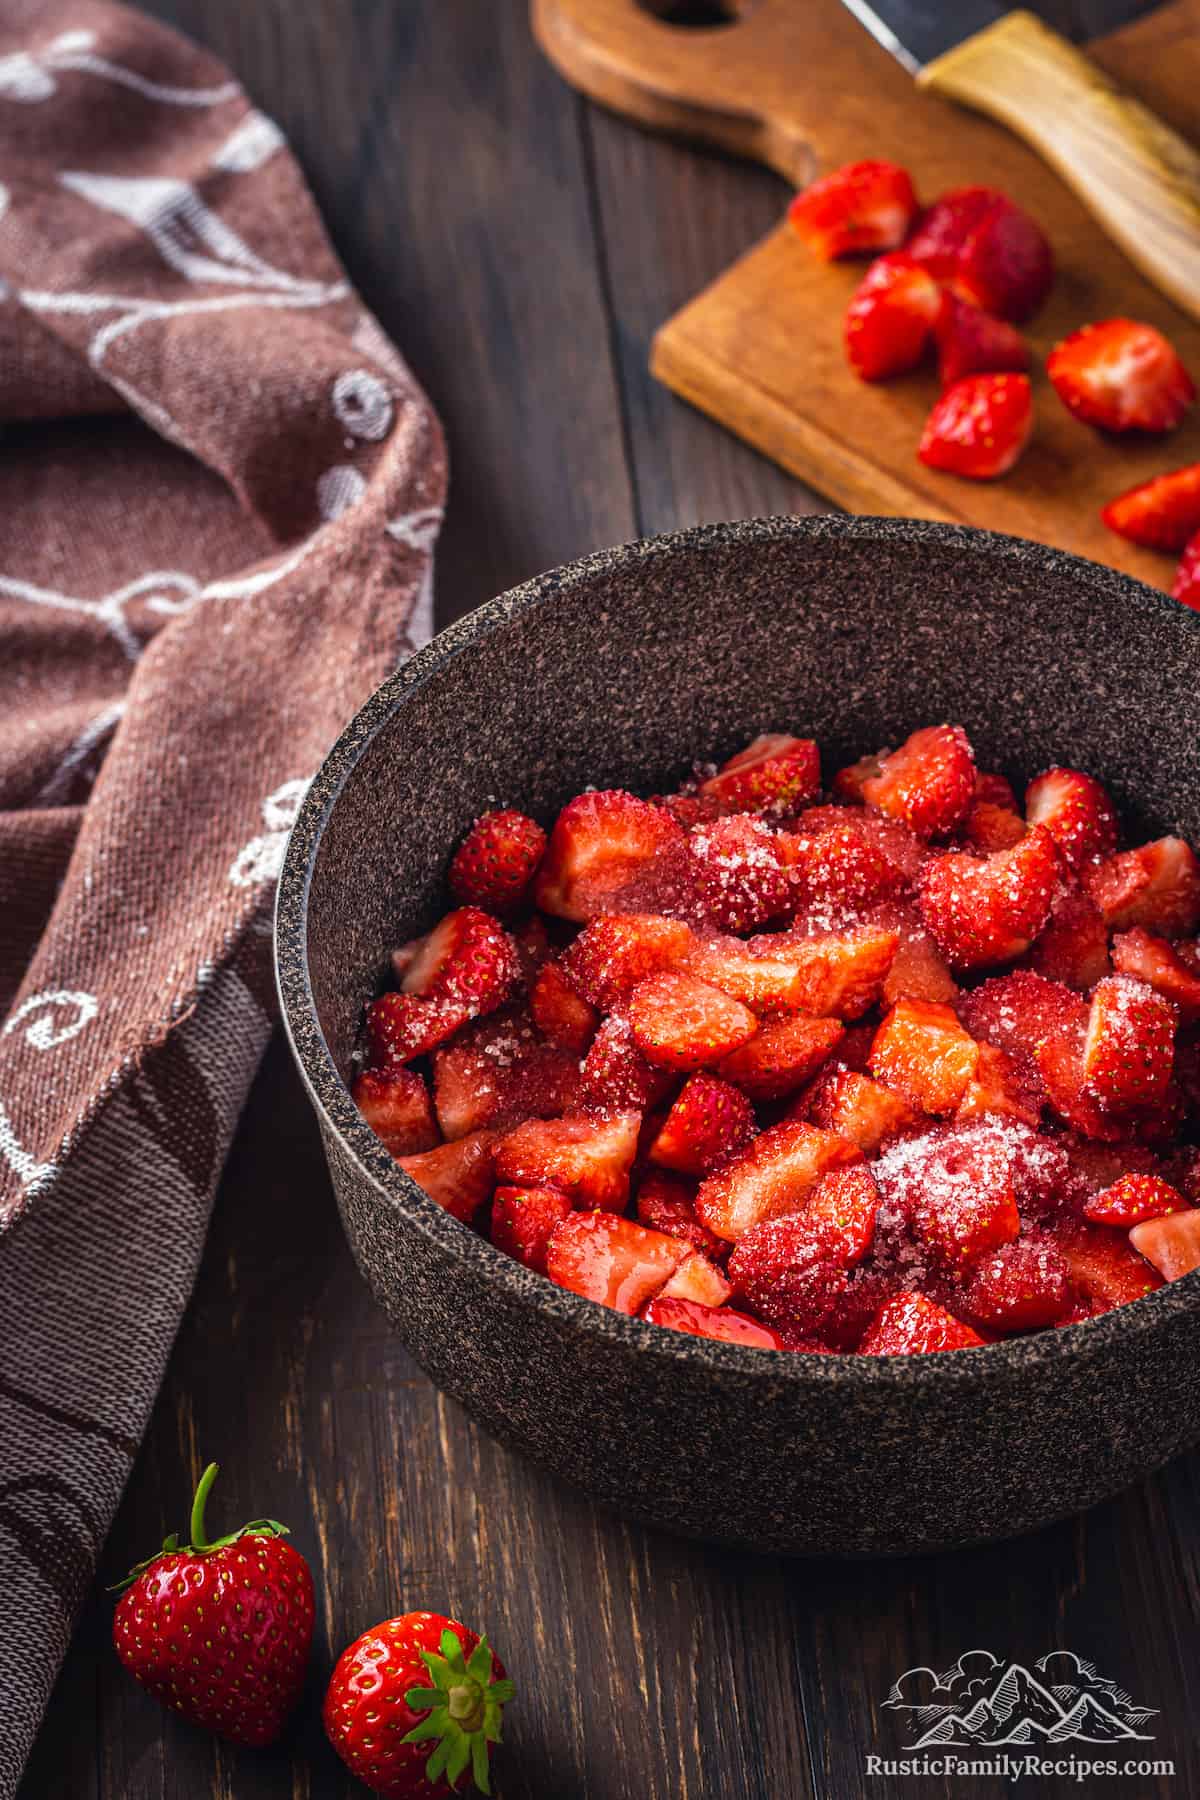 Chopped strawberries in a cast iron saucepan, sprinkled with sugar.